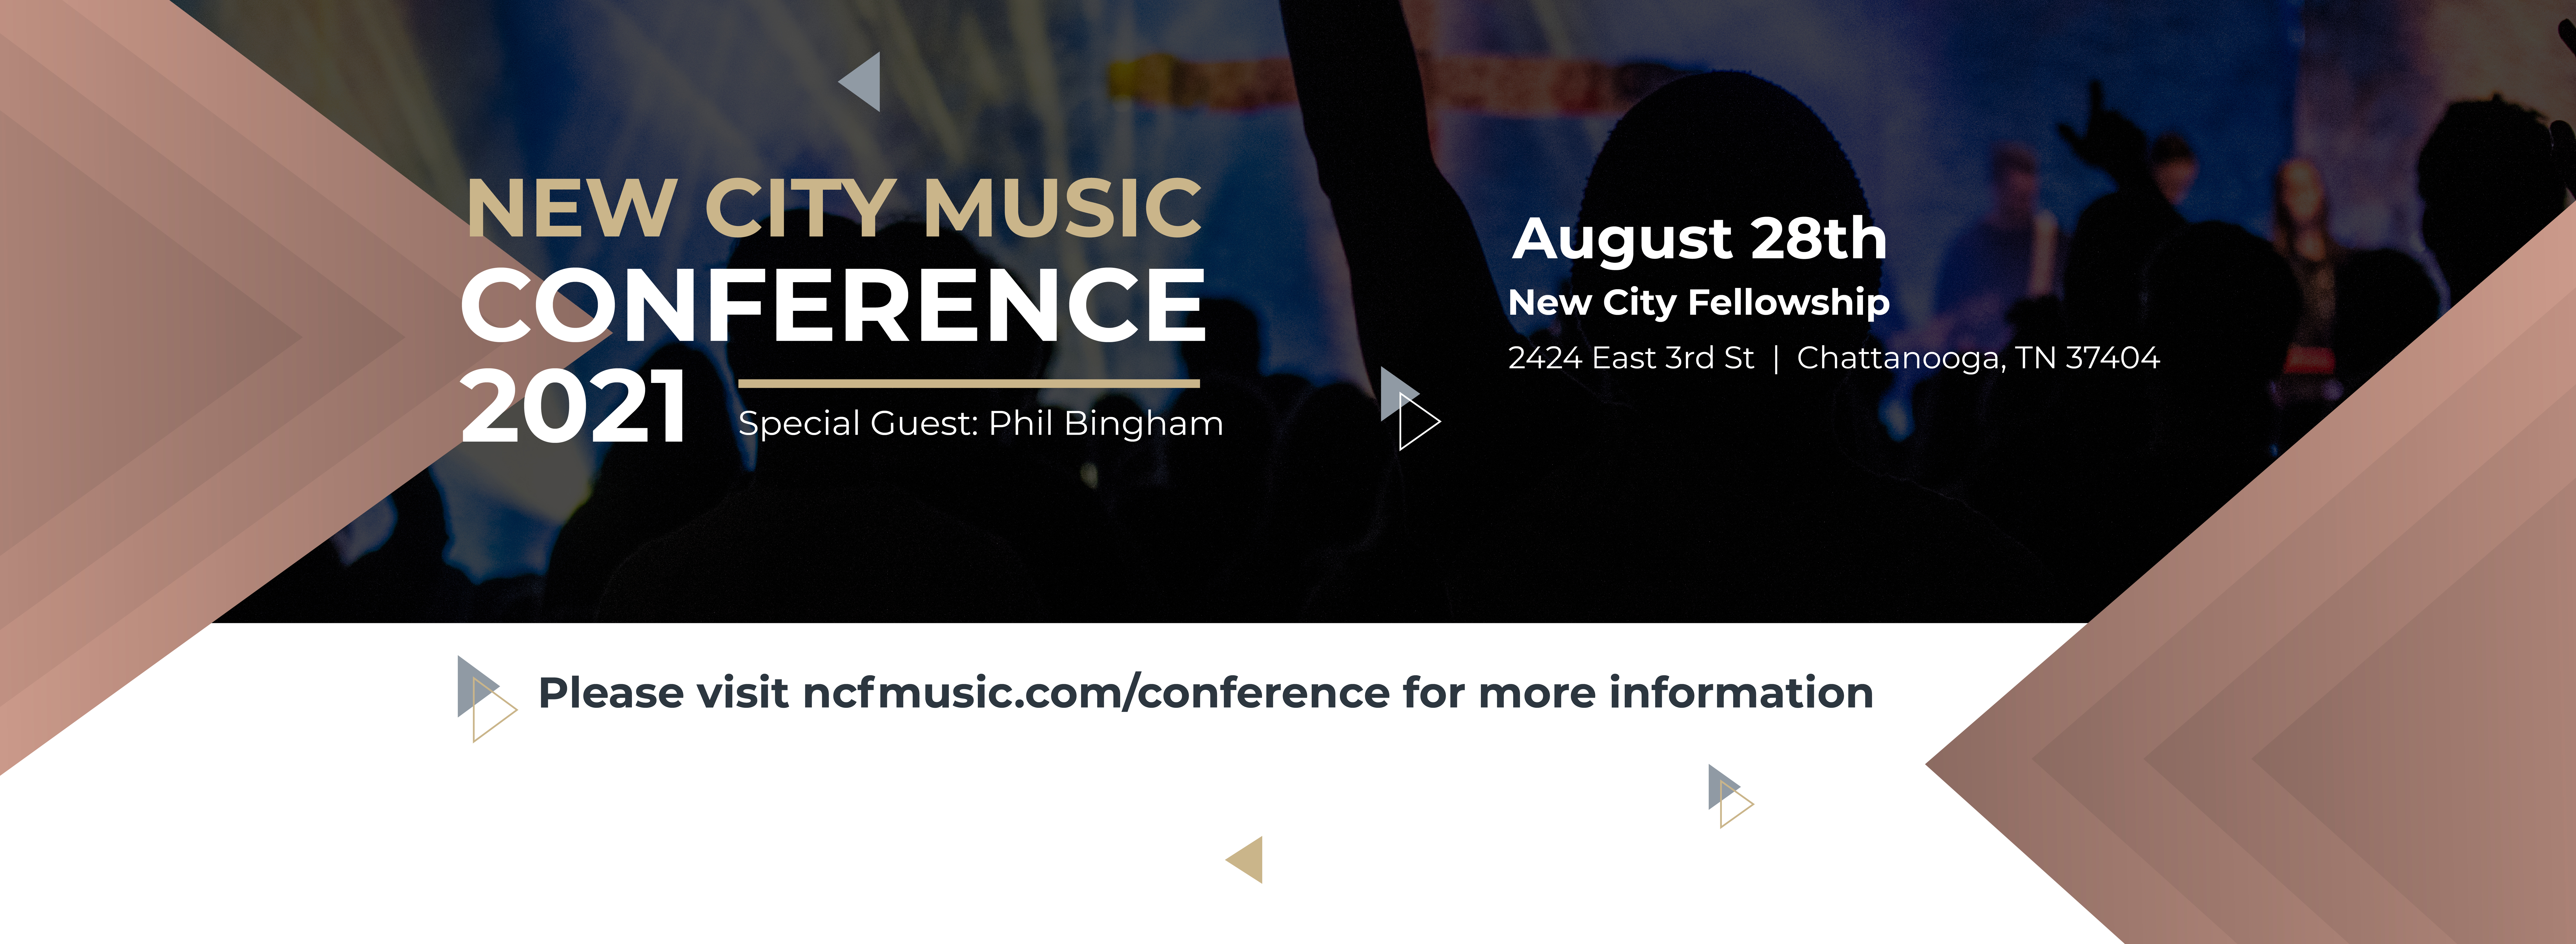 Image promoting 2021 Music Conference CHA